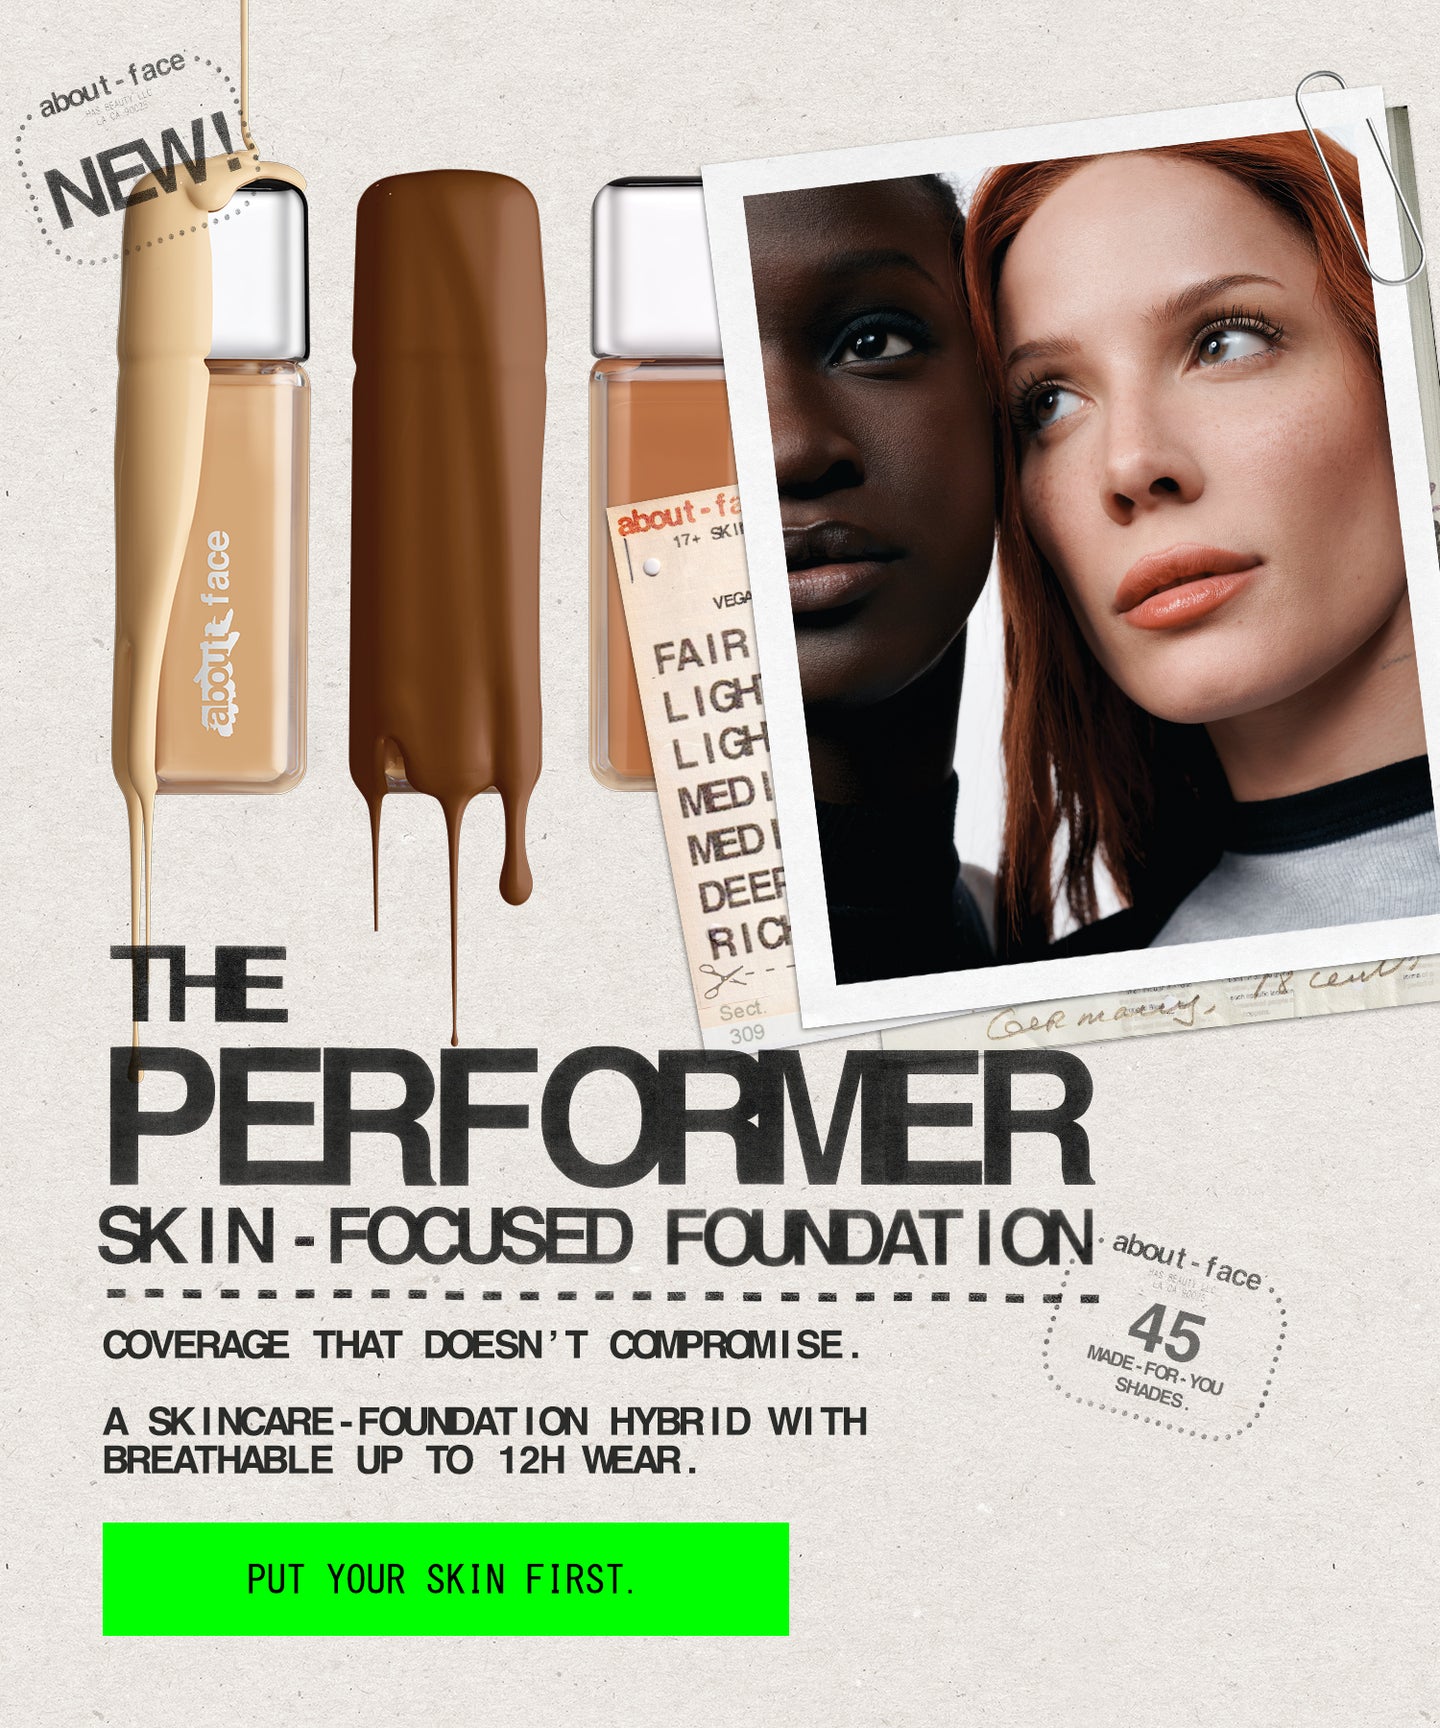 Halsey to launch makeup line, About-Face, on January 25